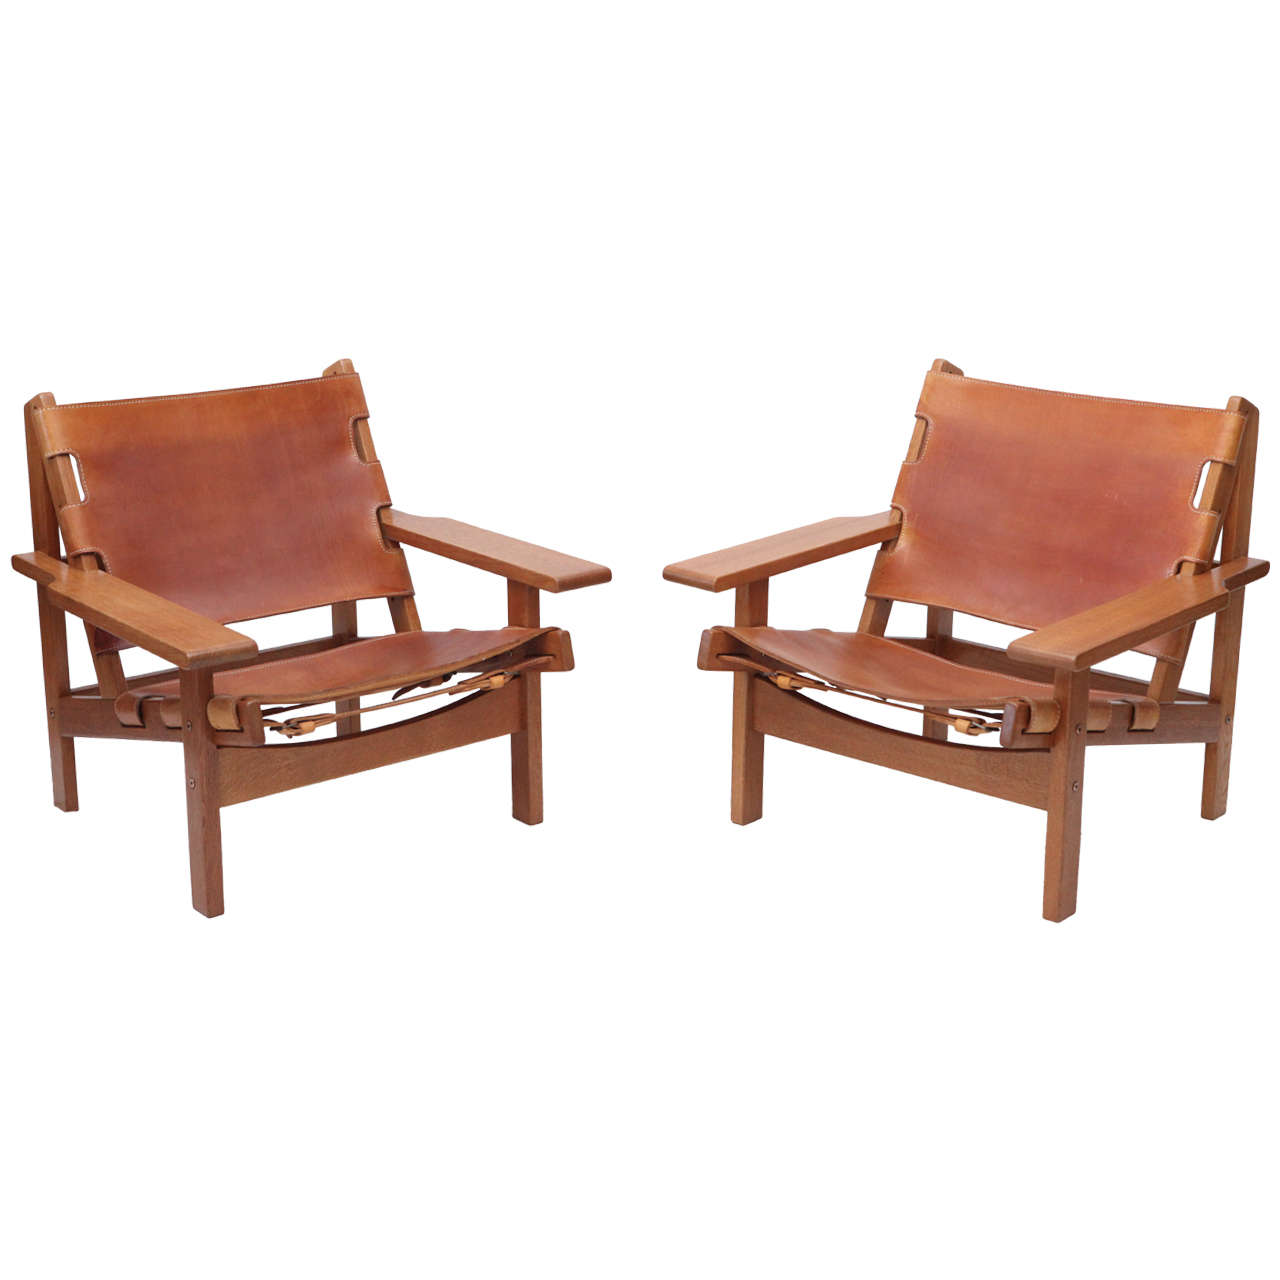 Pair of Erling Jessen "Hunting Chairs"